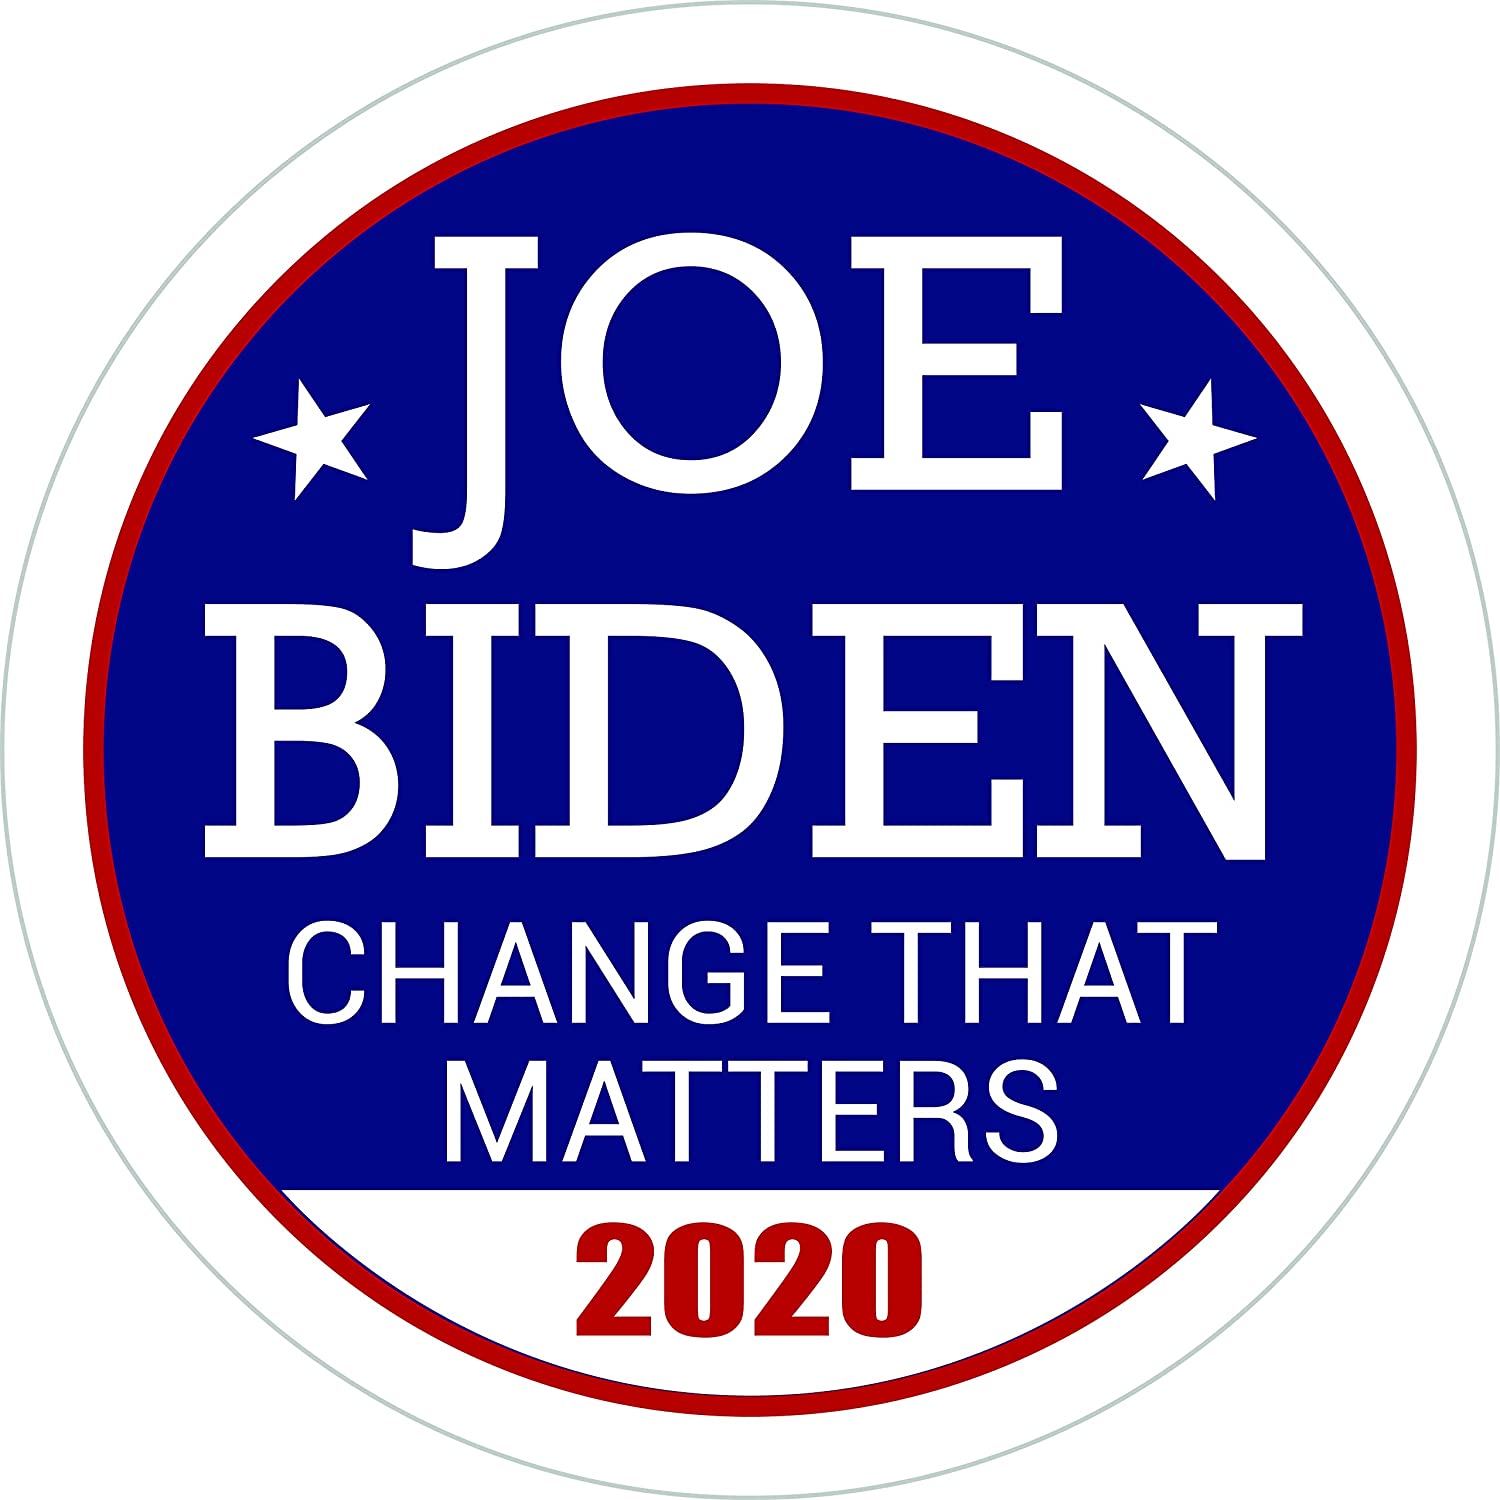 Joe Biden Democrat Democratic 2020 US President Candidate Bumper Sticker Wall Decal For Car Windows Cars Windows that Matters United States Presidential Candidates Political Size 6x6 inch: Home